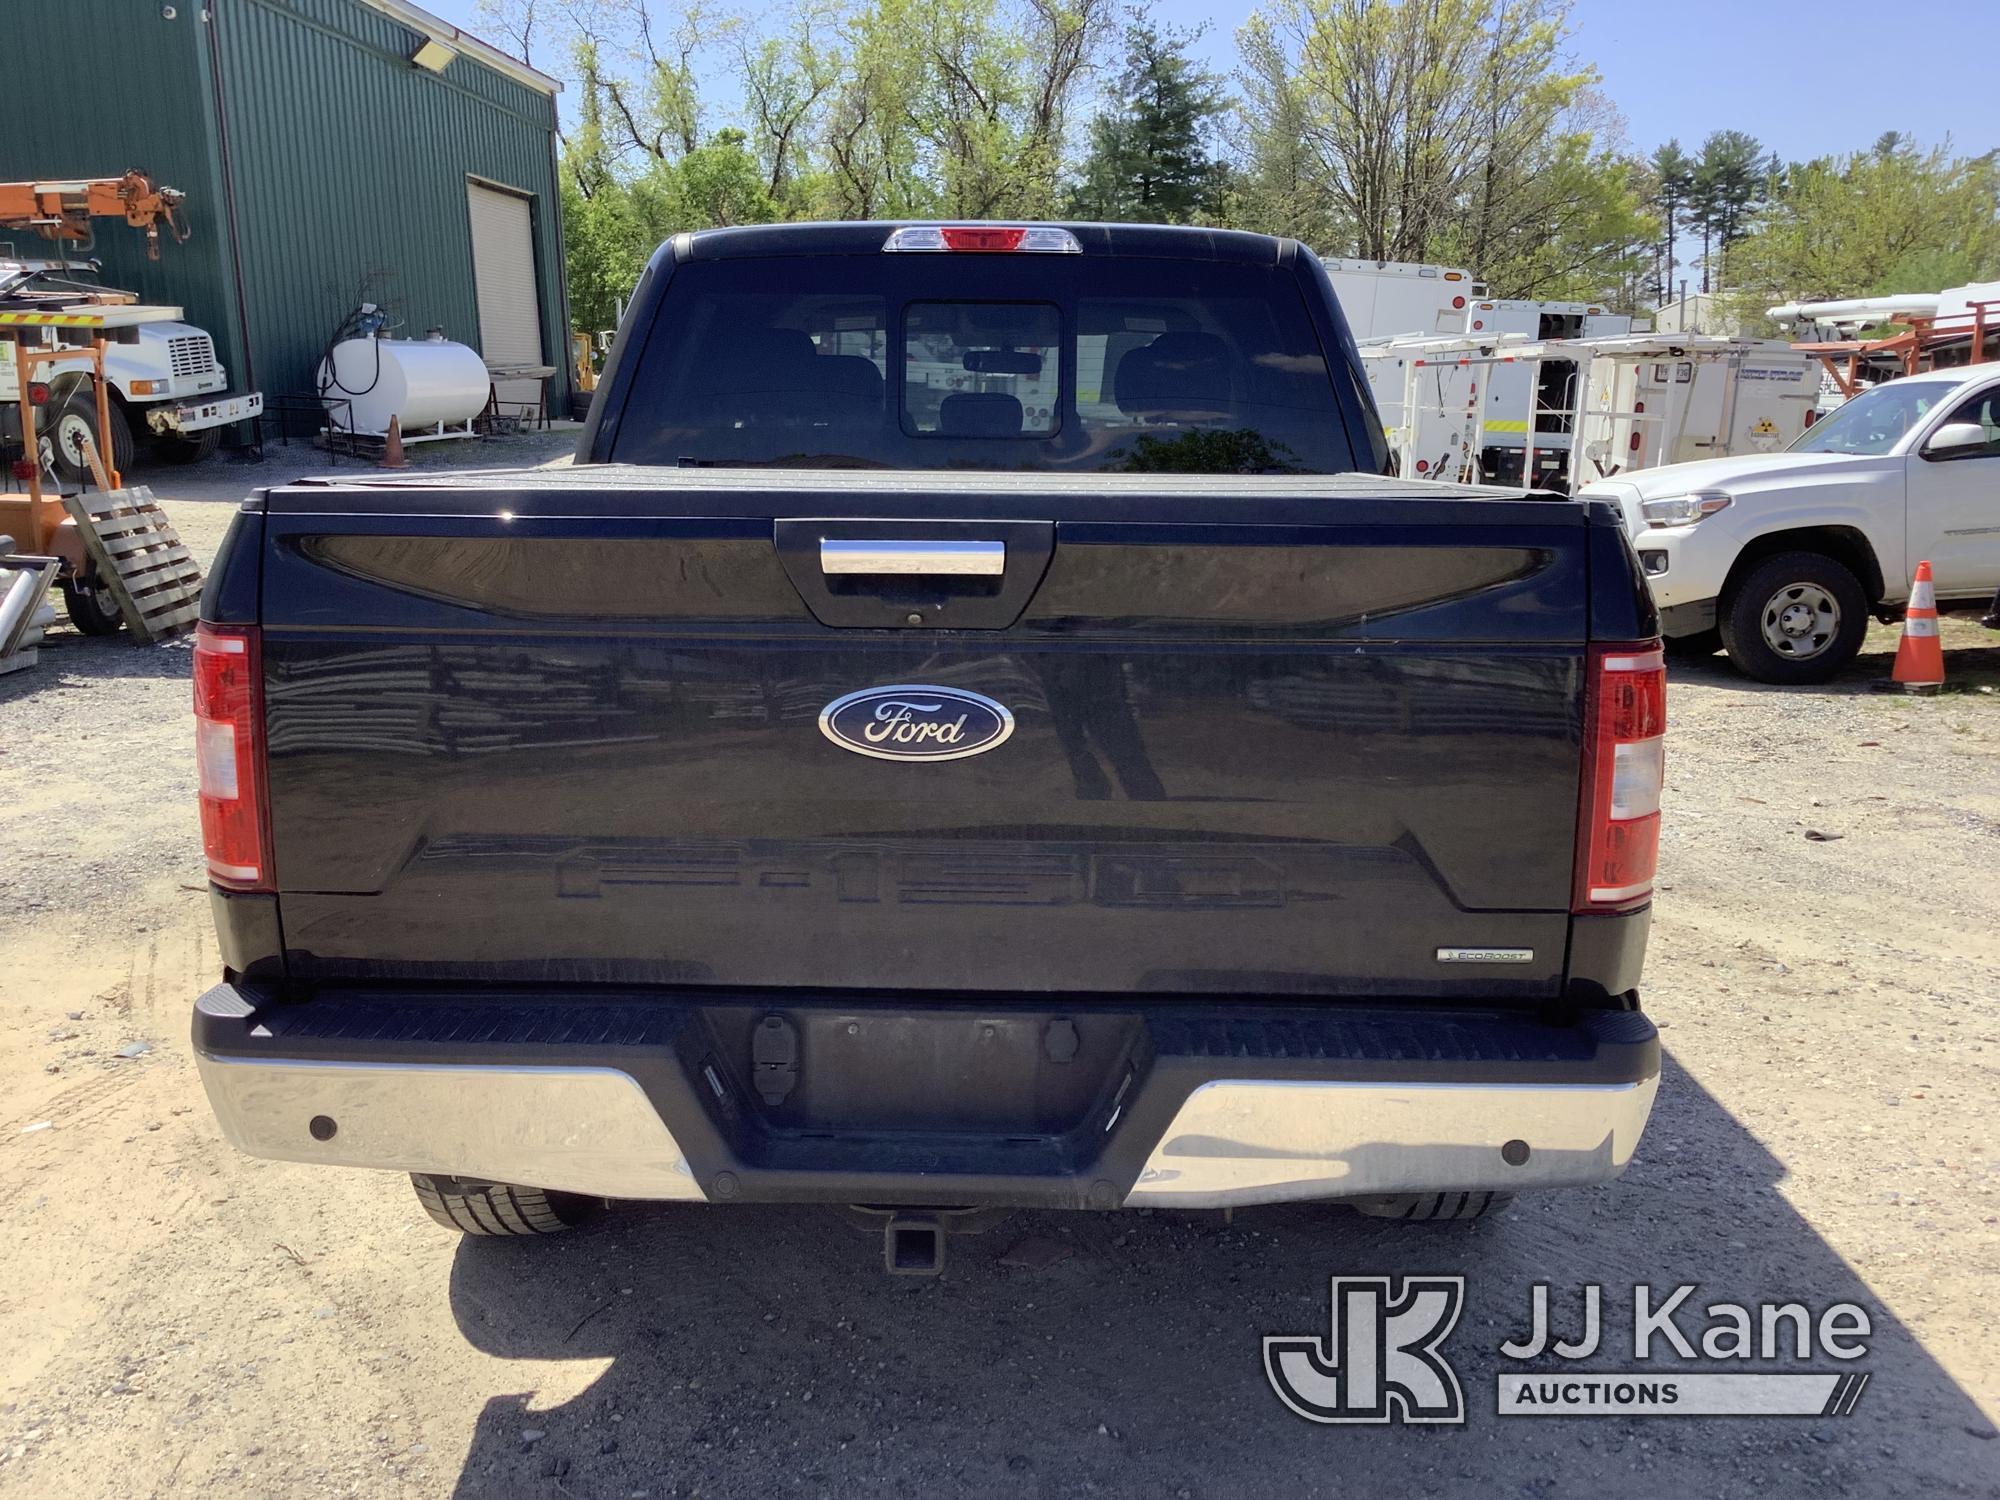 (Harmans, MD) 2018 Ford F150 4x4 Crew-Cab Pickup Truck, Has transmission issues Rune& Moves, Engine